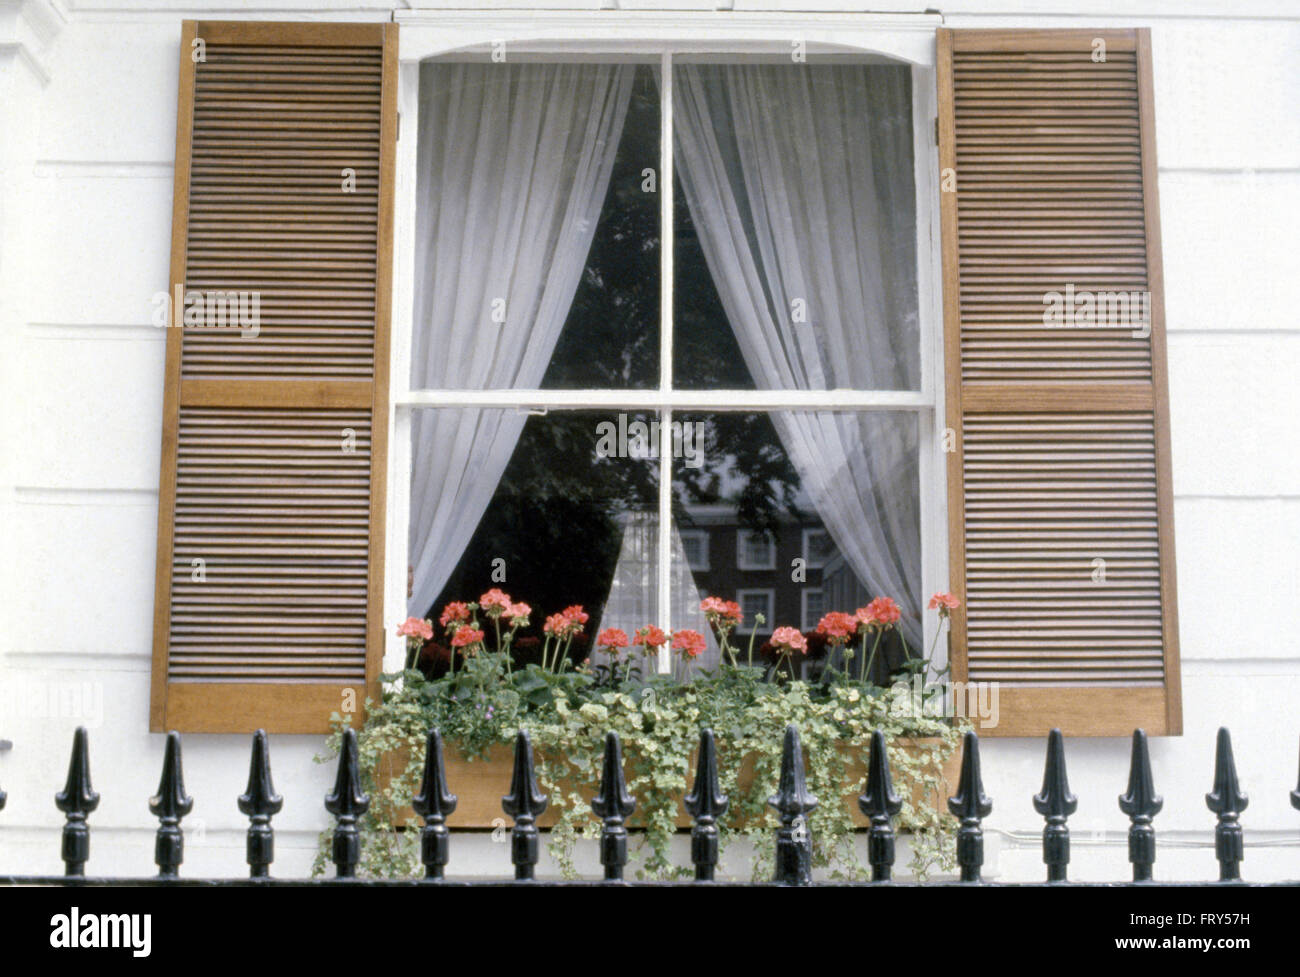 Iron railings in front of house with wooden louvre shutters on window with white curtains Stock Photo